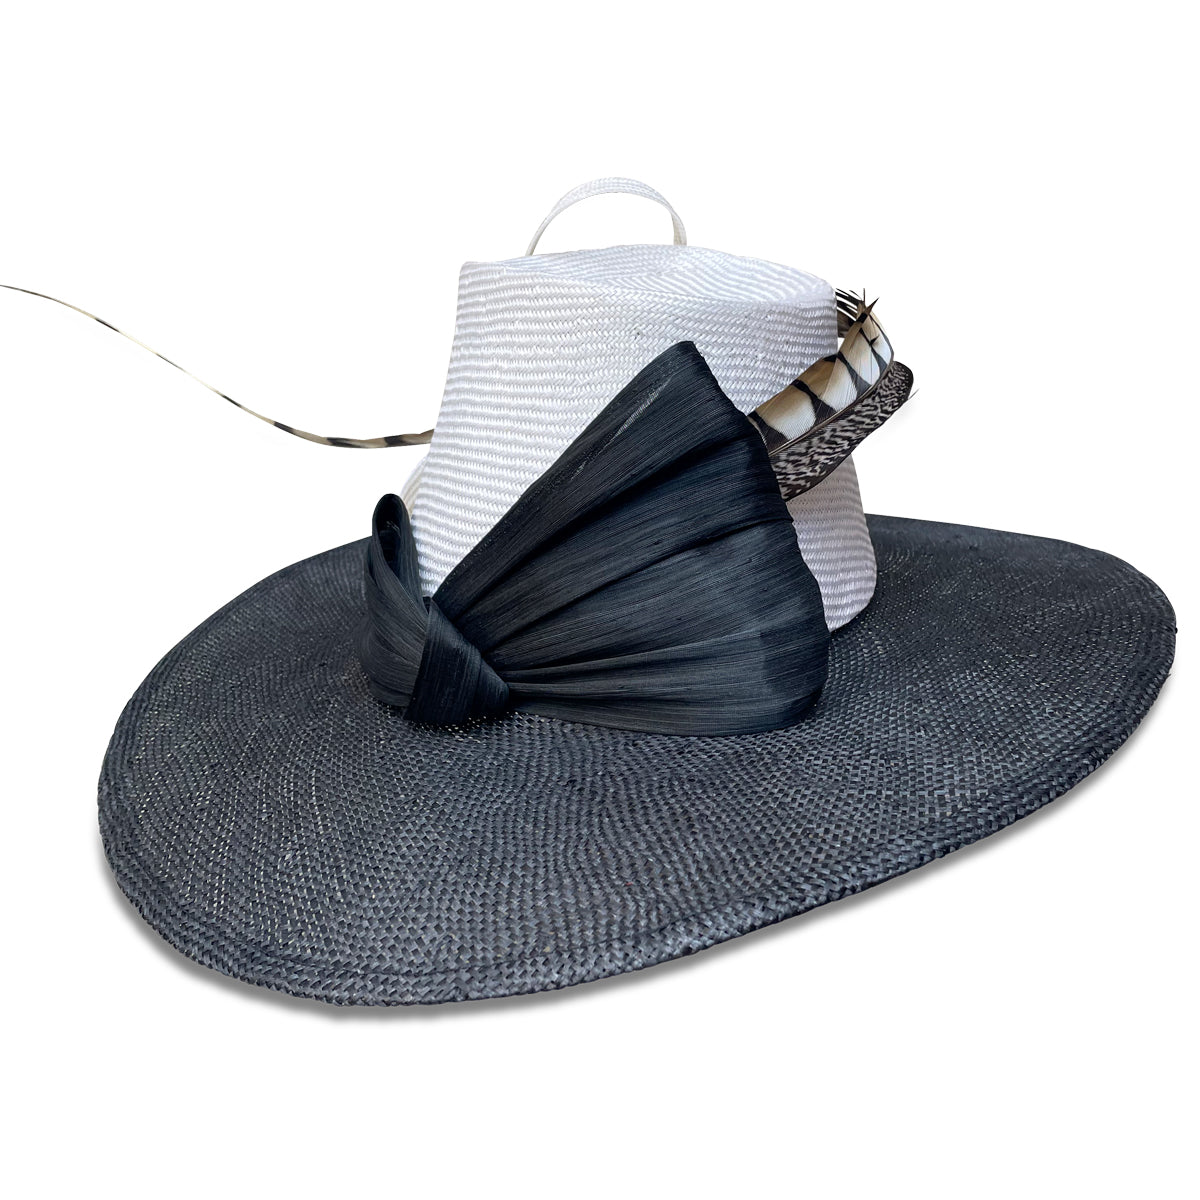 Newman Black and White Straw Hat from Cha Cha's House of Ill Repute a NYC hat shop